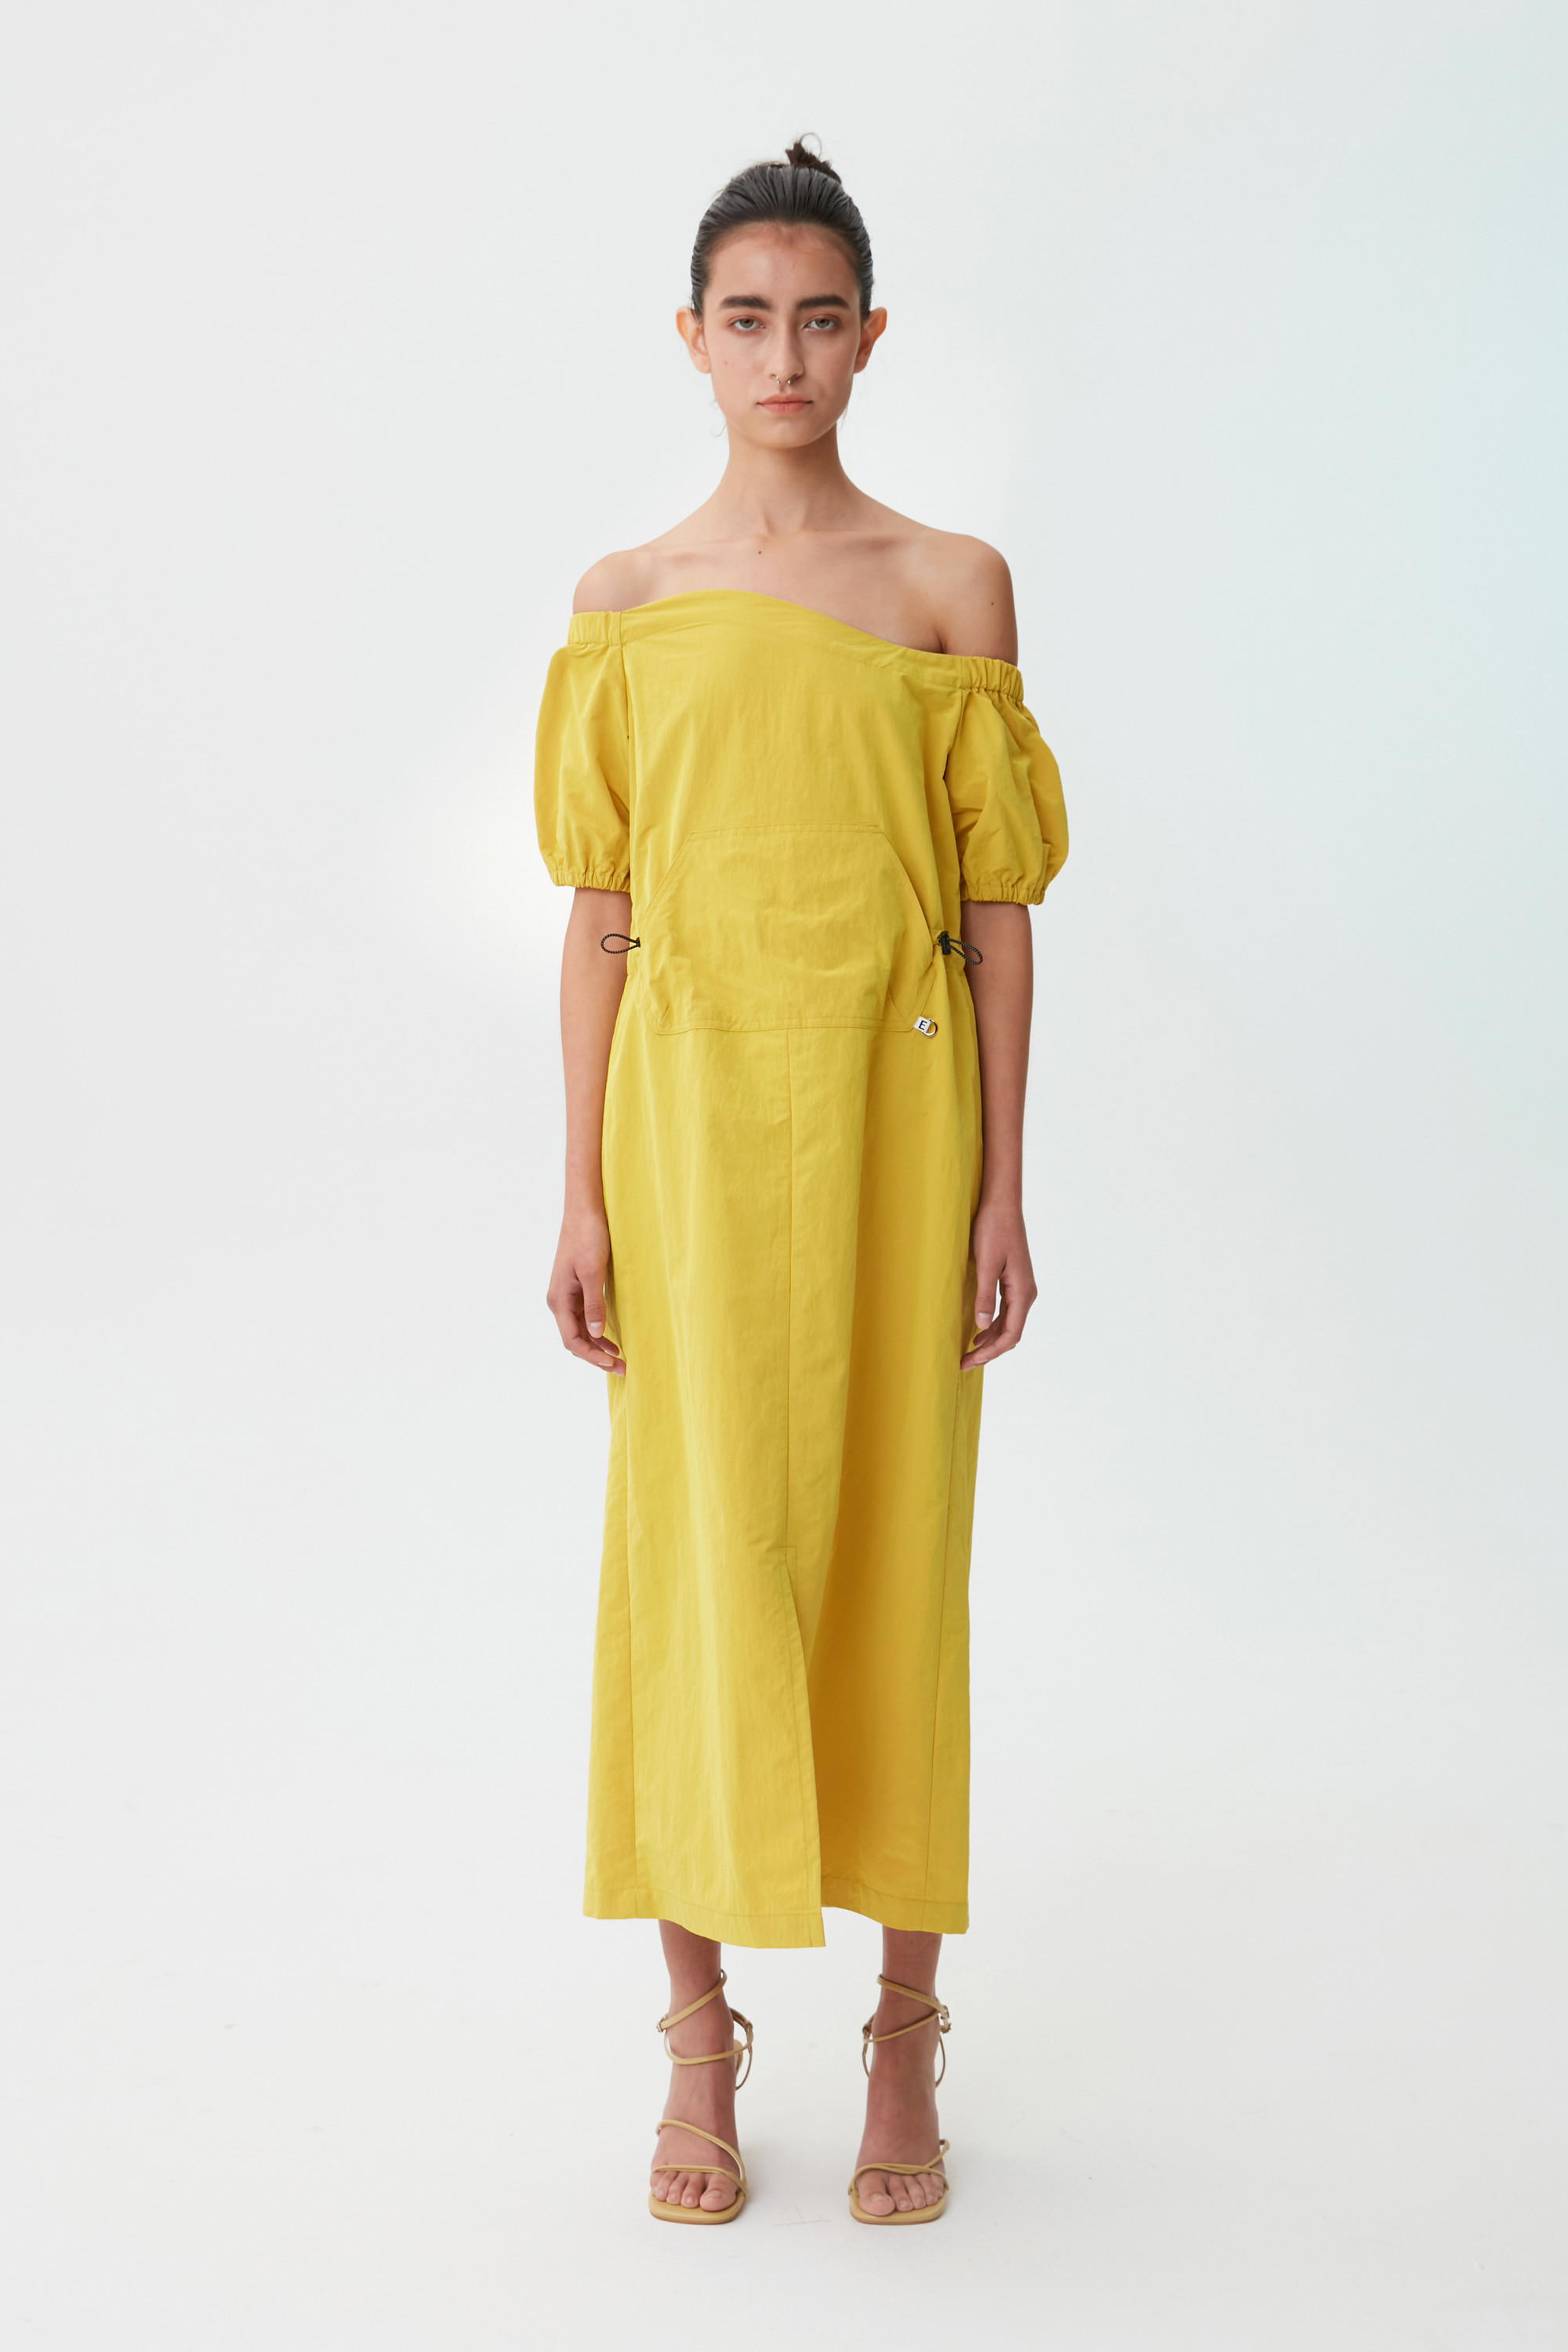 WAVE OFF-THE SHOULDER DRESS (YELLOW) (3colors)